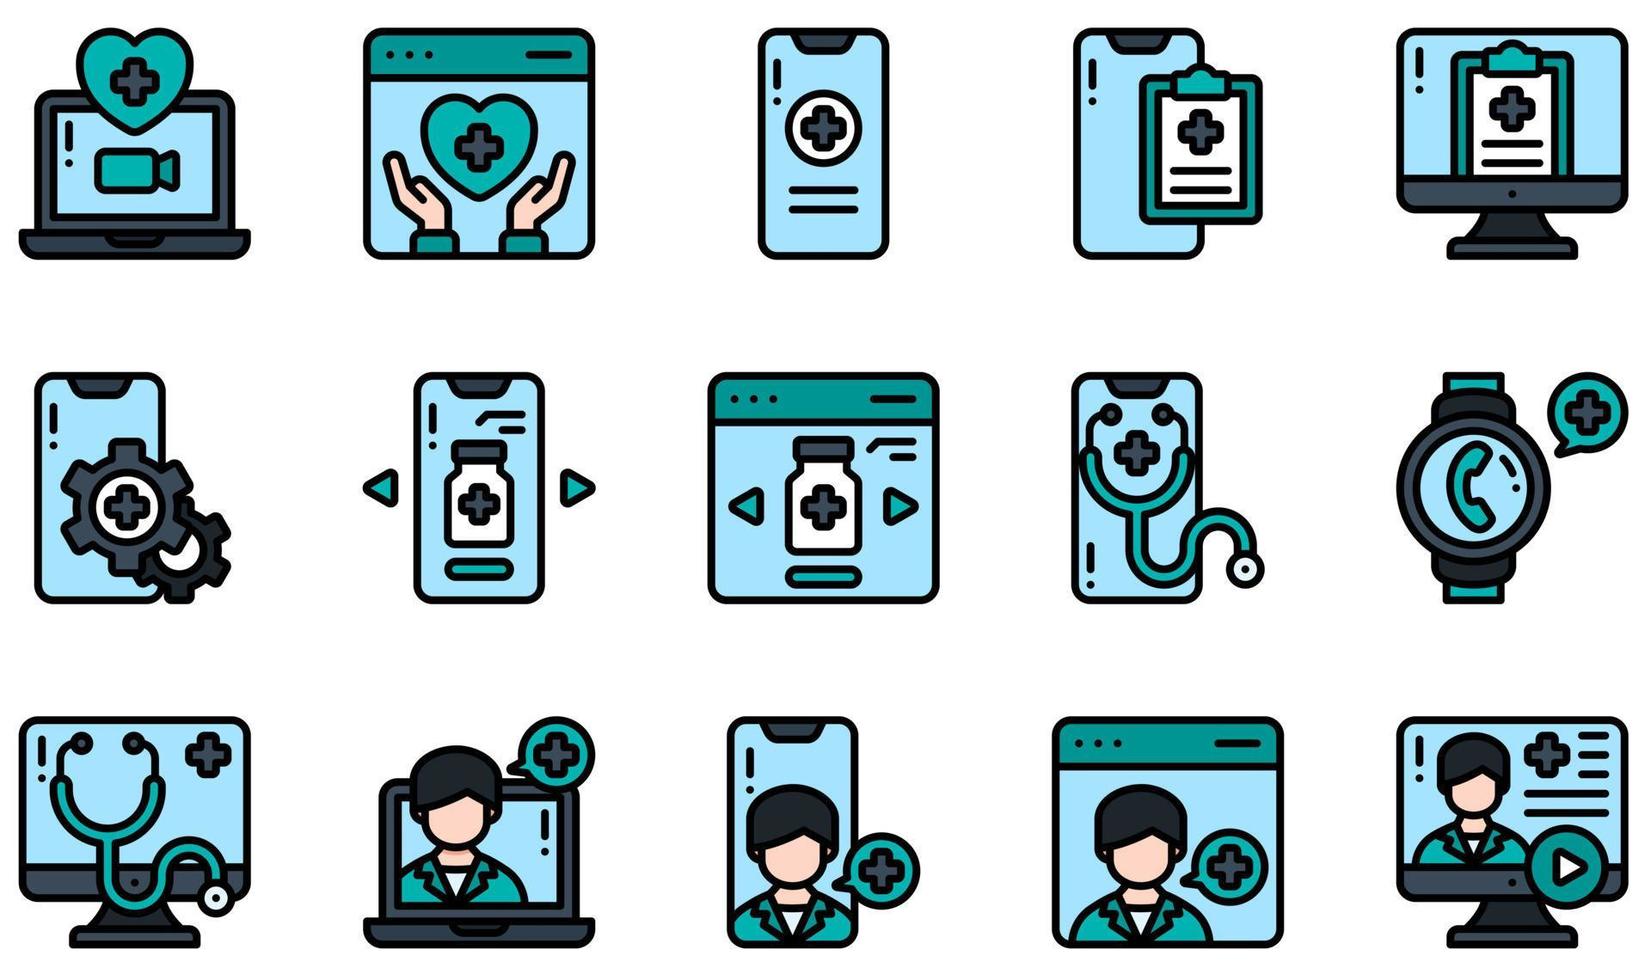 Set of Vector Icons Related to Telemedicine. Contains such Icons as Medical, Medical App, Medical Report, Online Pharmacy, Telemedicine, Stethoscope and more.